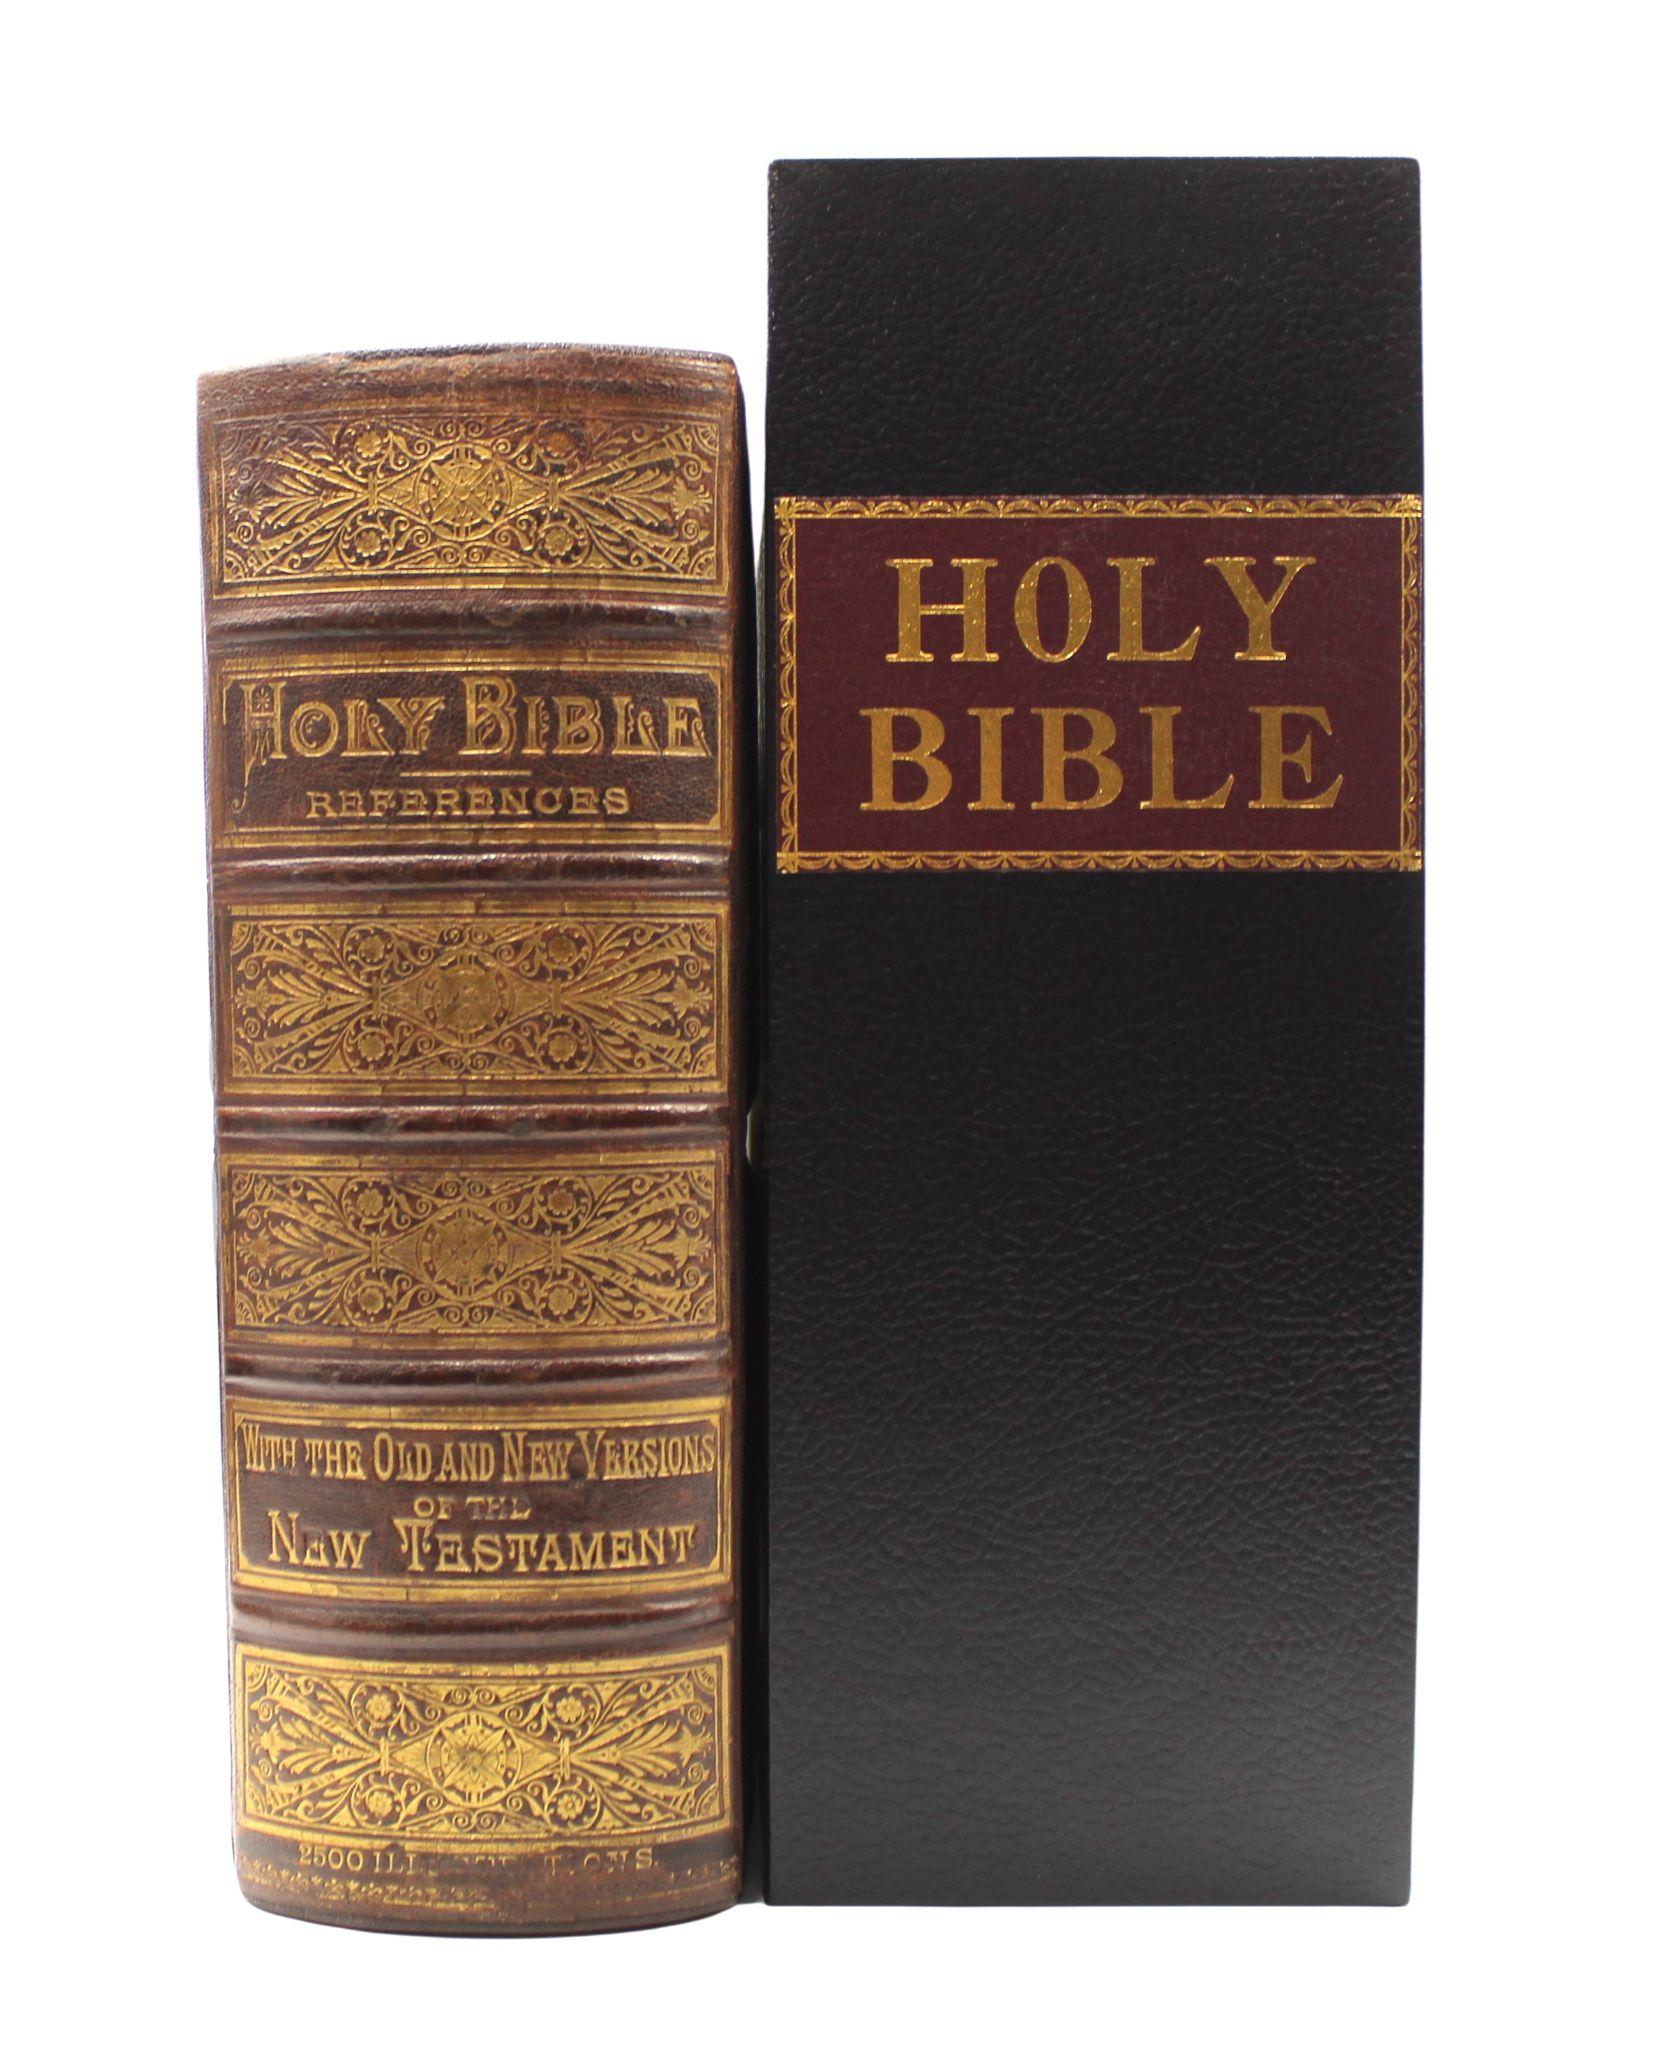 The “Standard” Edition of The Holy Bible, Containing the Old and New Testaments and Apocrypha, Translated out of the Original Tongues, Together with Cruden’s Complete Concordance… and Revised New Testament, with Many Other Important and Useful Aids